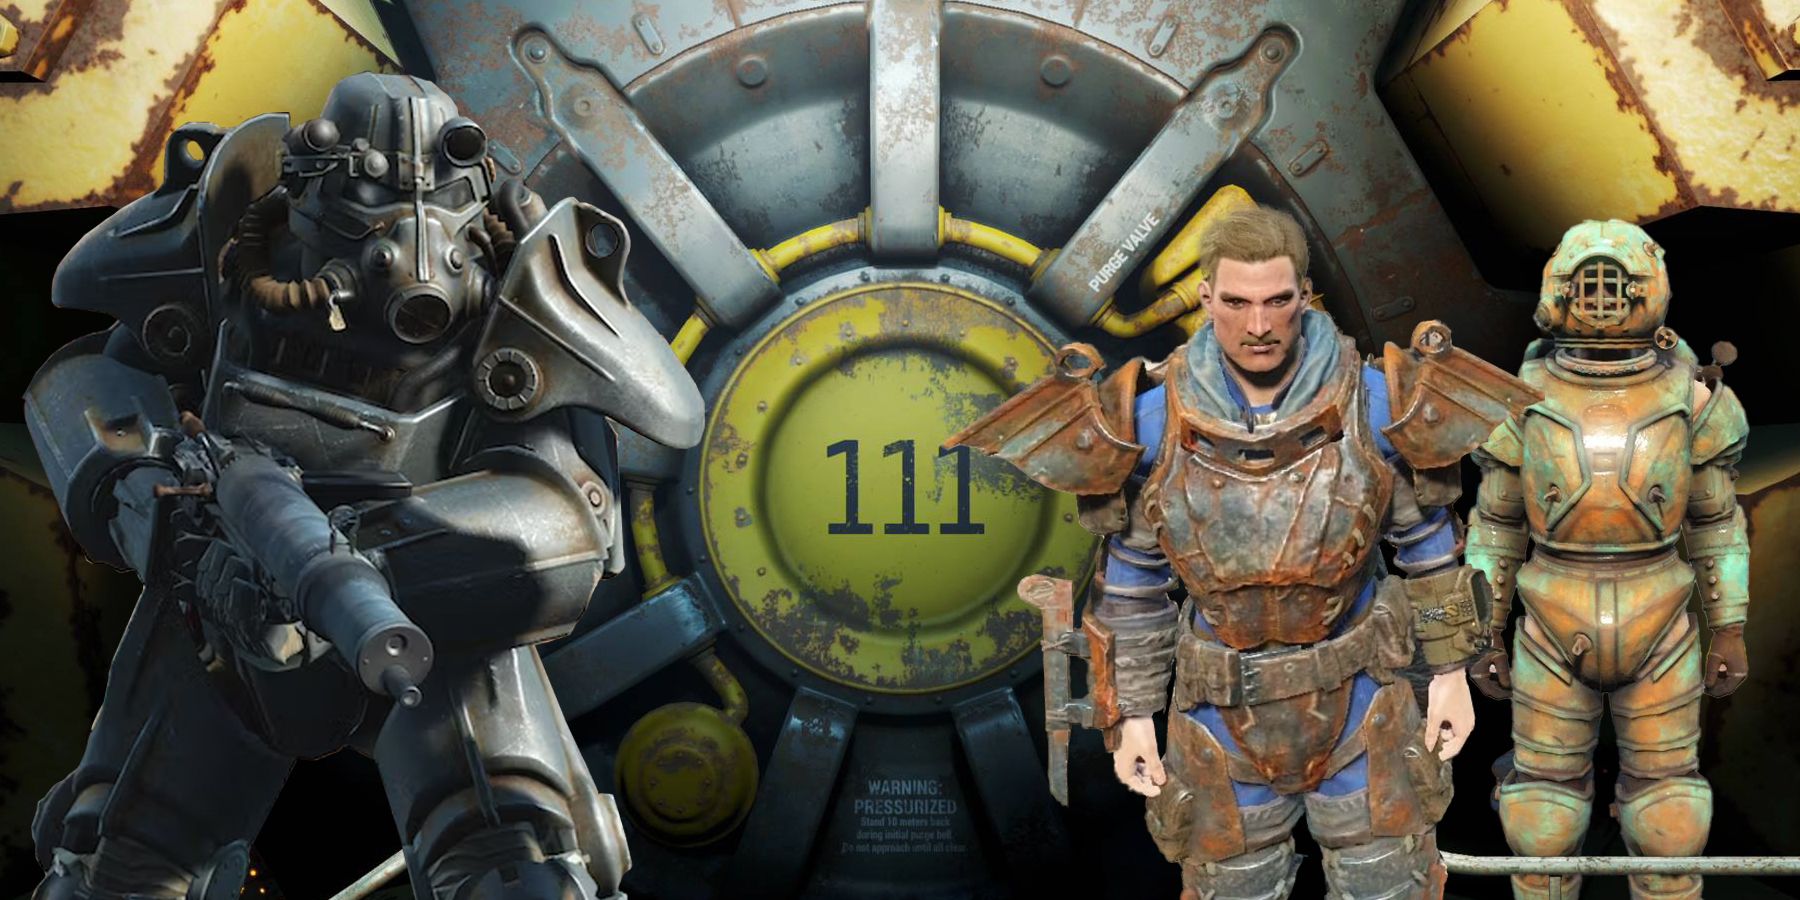 A group of Fallout 4 characters standing in front of a circular metal door and wearing the best armor in the game